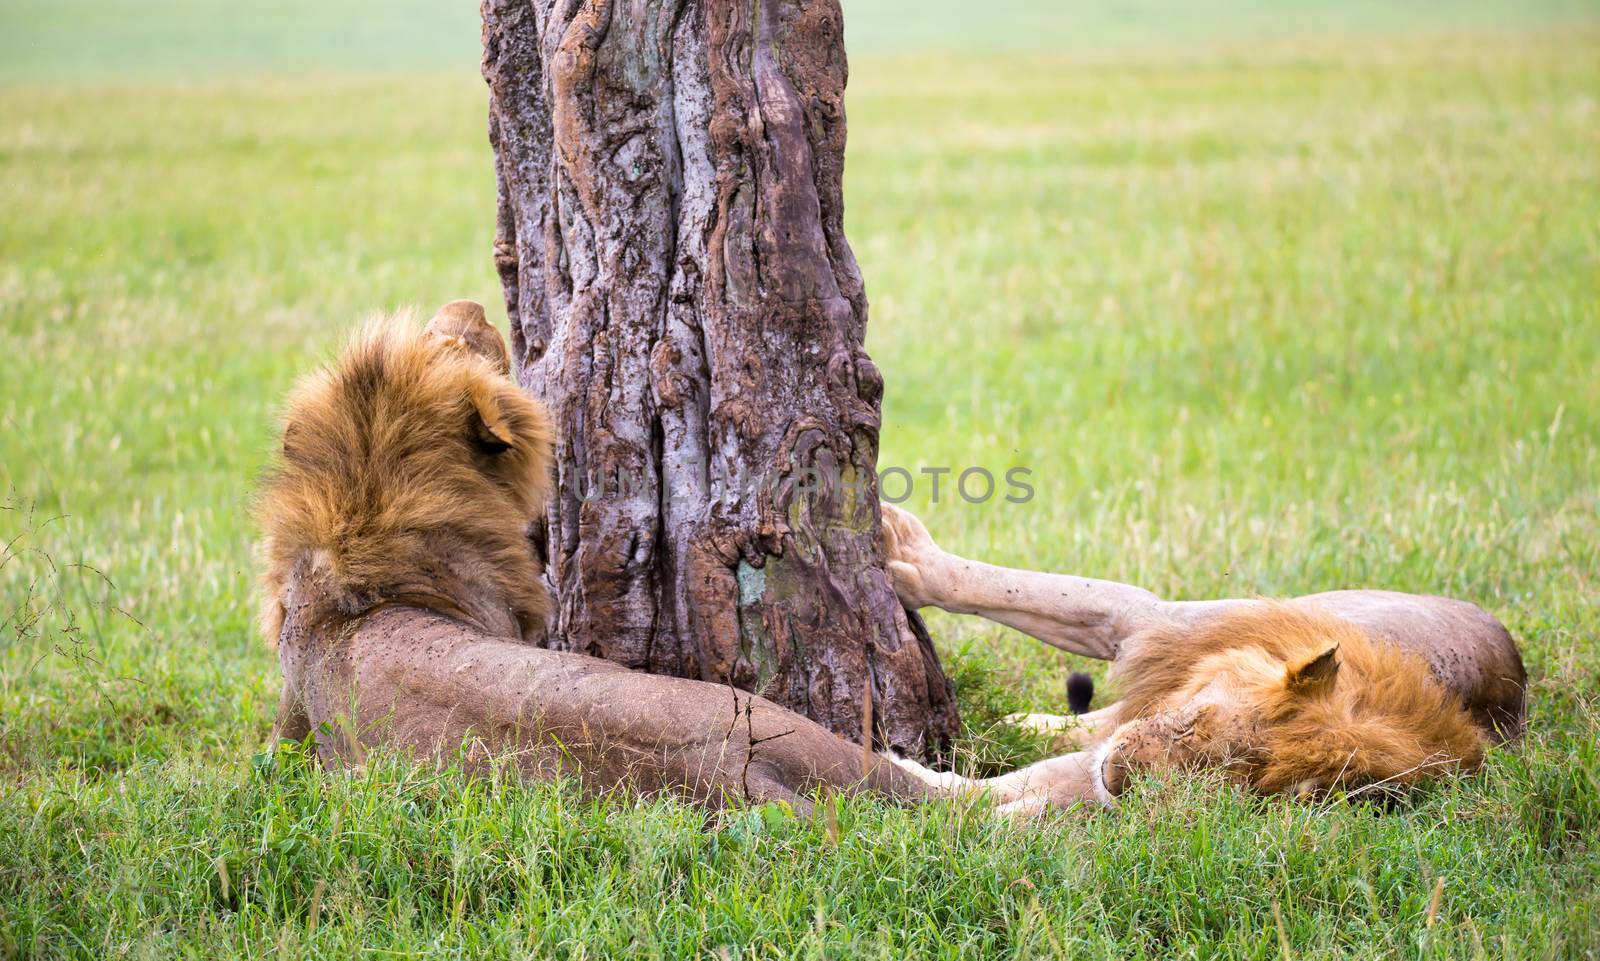 Some big lions show their emotions to each other in the savanna of Kenya